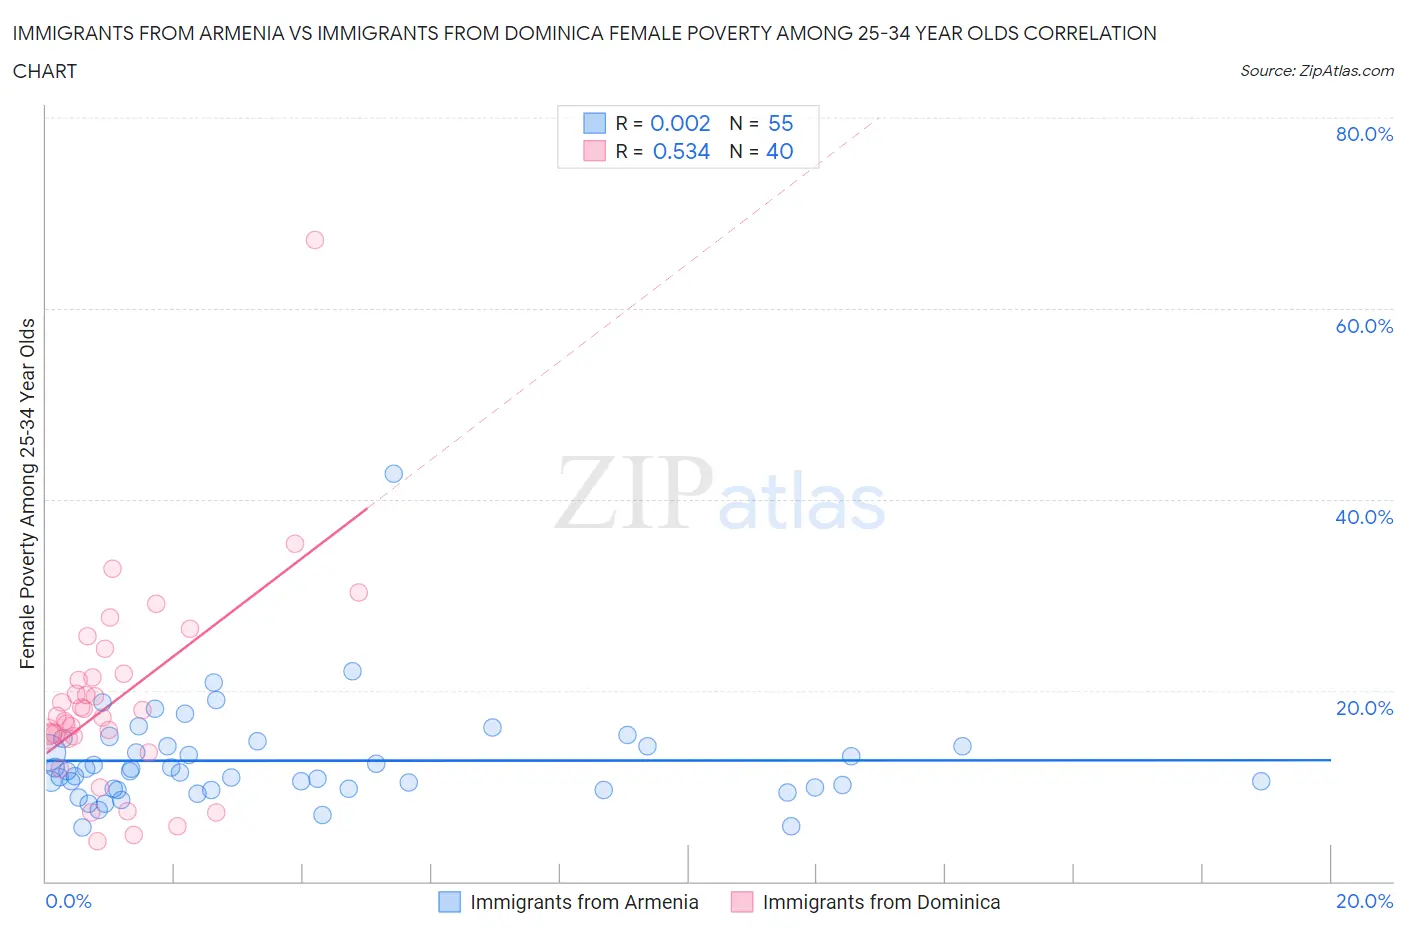 Immigrants from Armenia vs Immigrants from Dominica Female Poverty Among 25-34 Year Olds